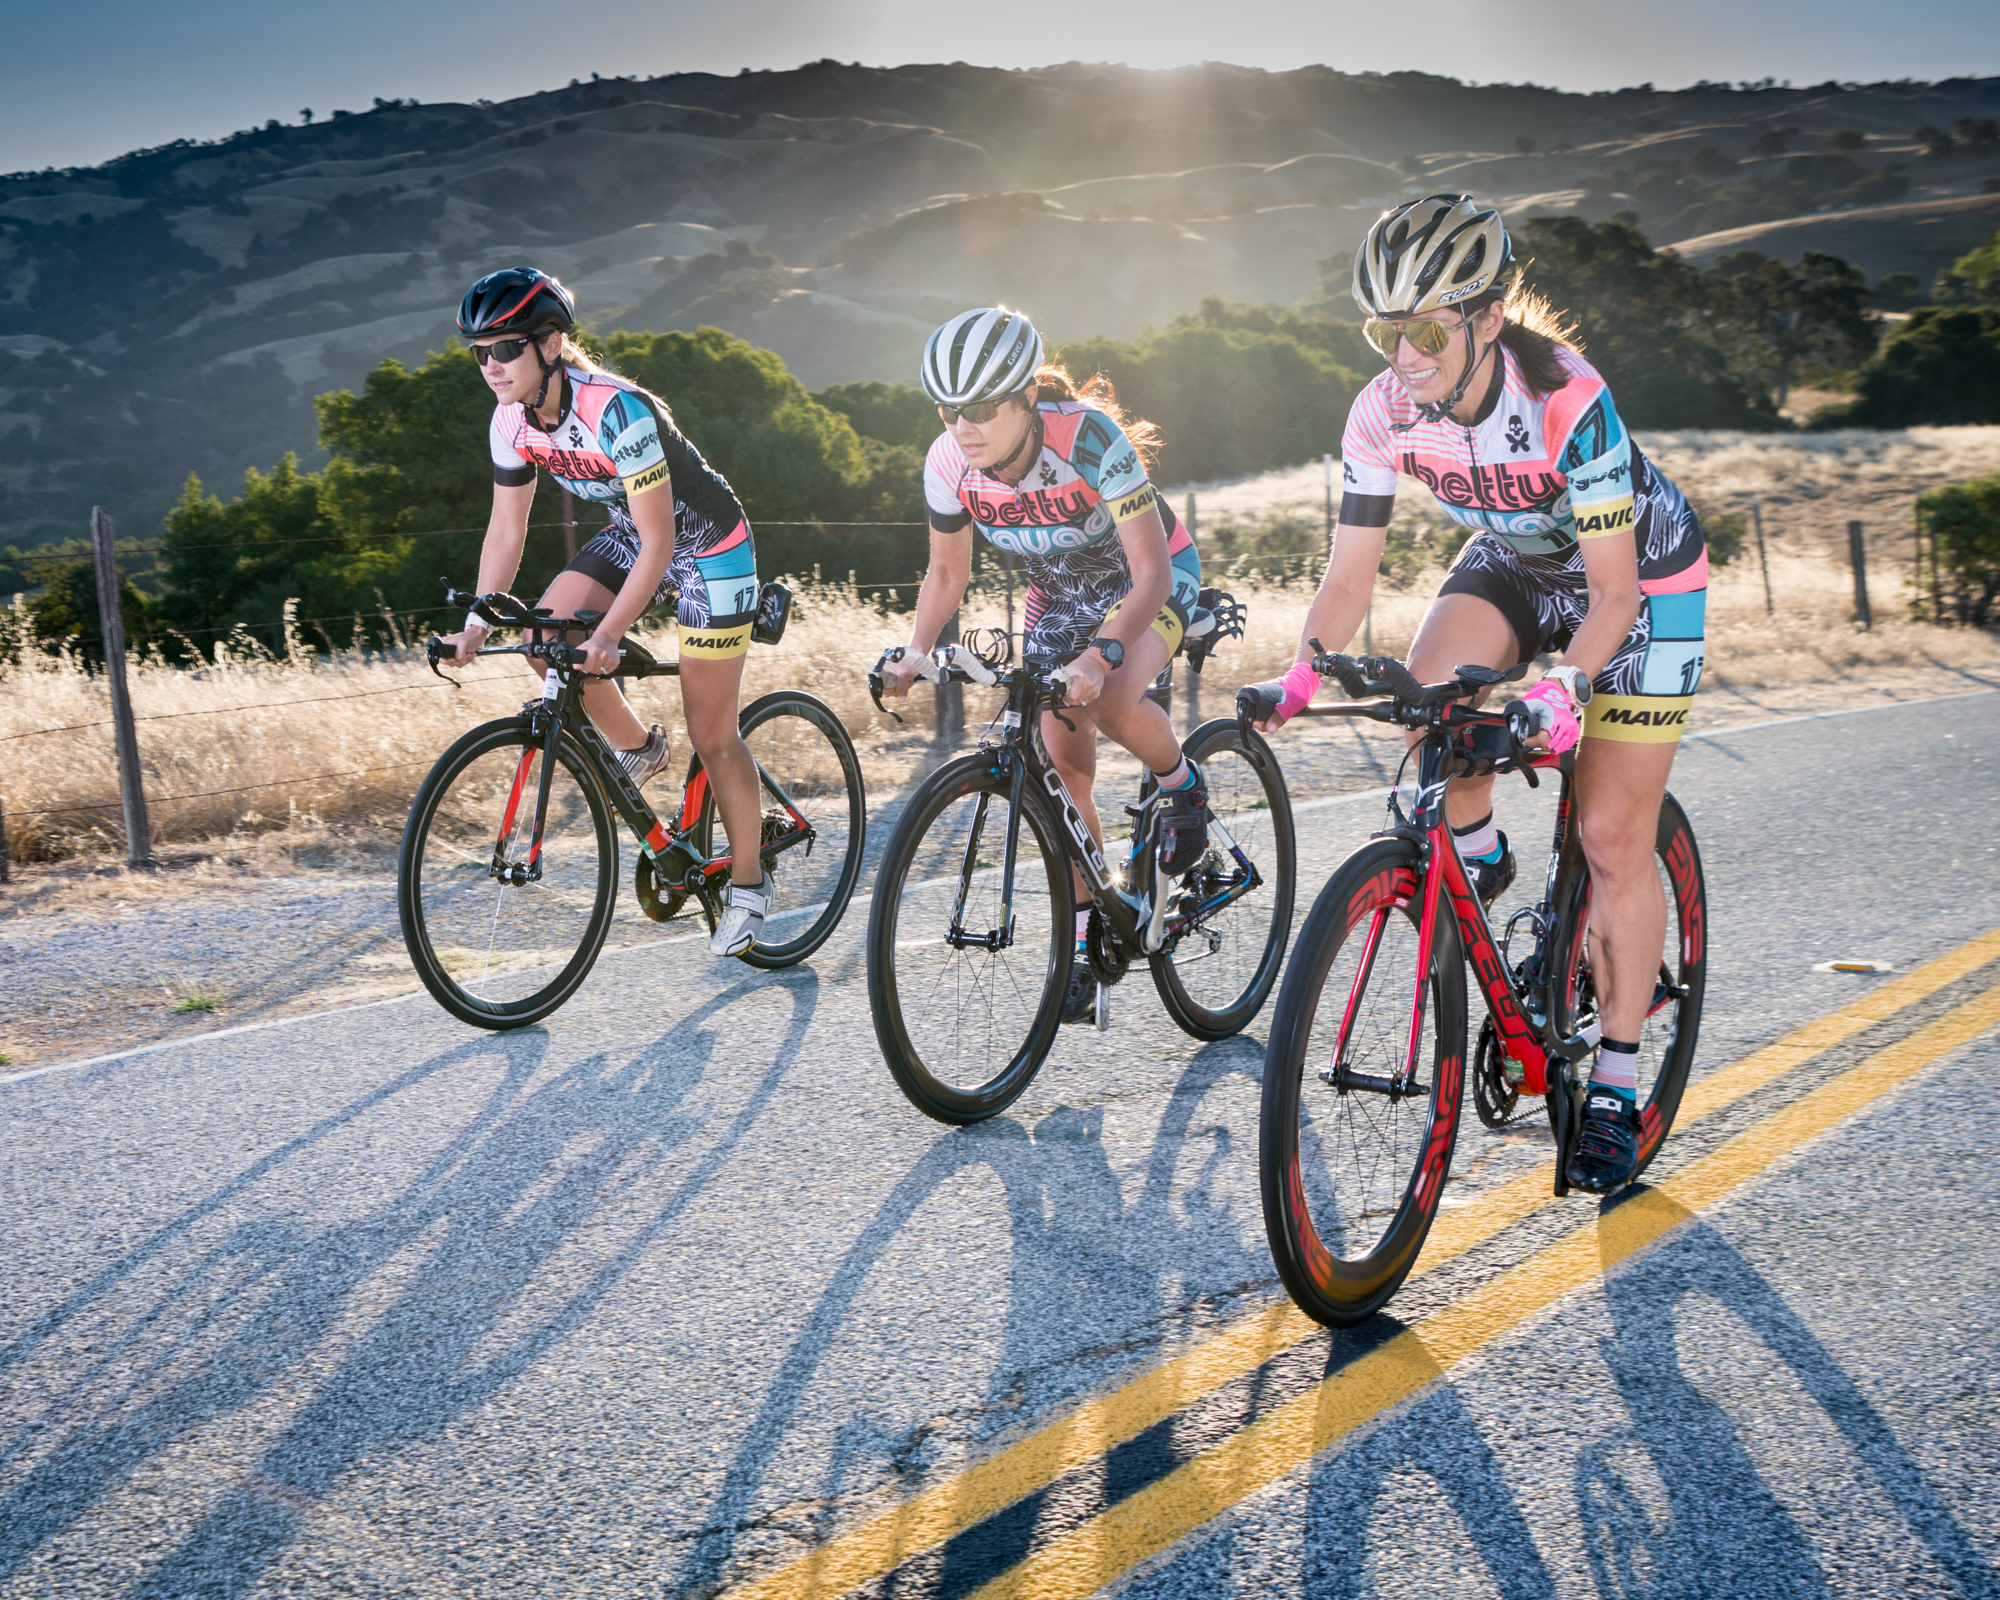 feltbicycles_roadcyling_fitwomen_girocycling_advertisingphotographer_sanfranciscobayarea-3924